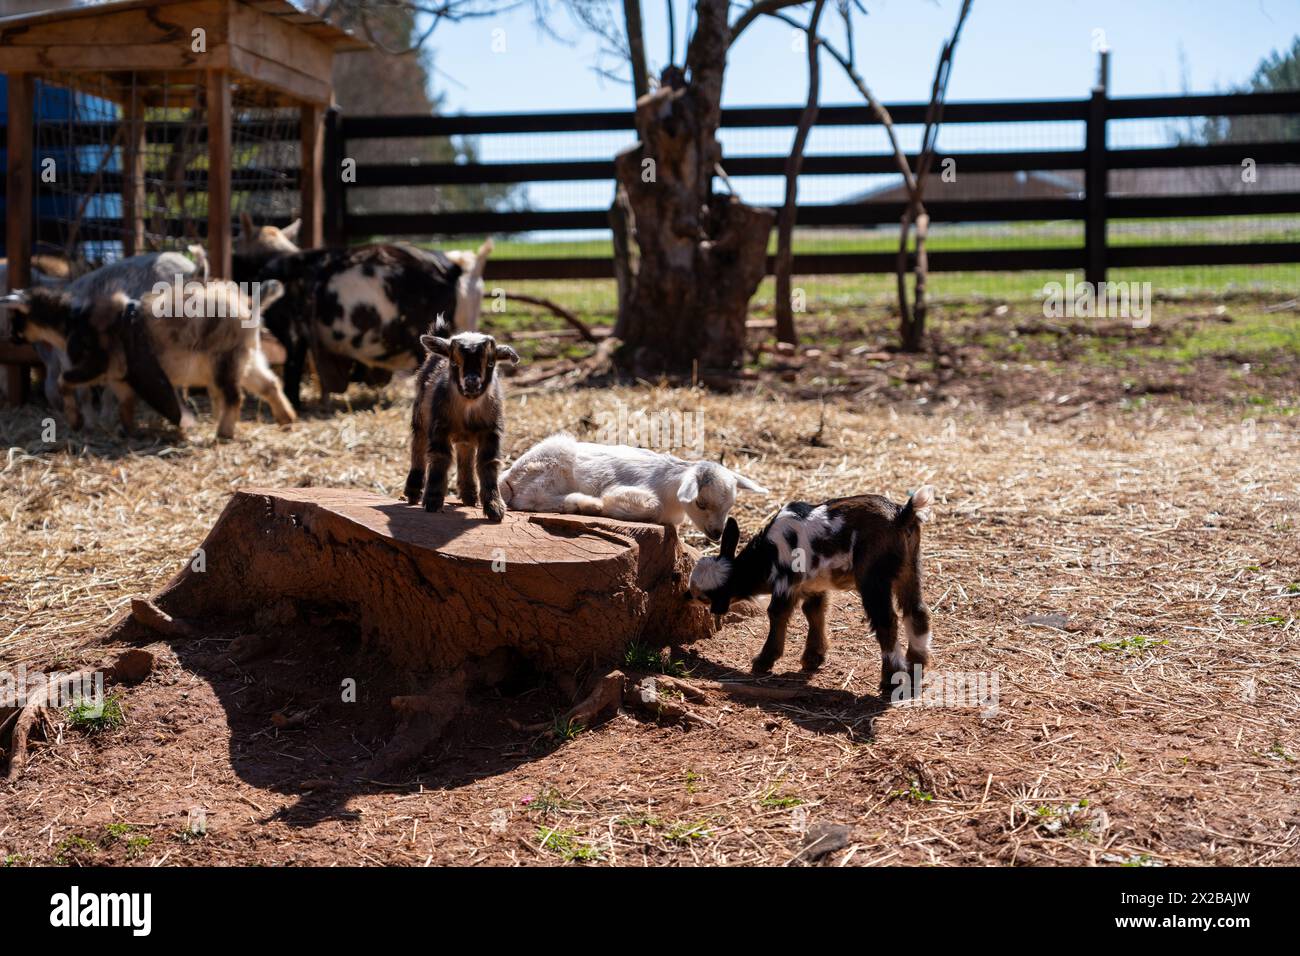 Three baby goats playing on a tree stump with adult goats and fencing in the background. Stock Photo